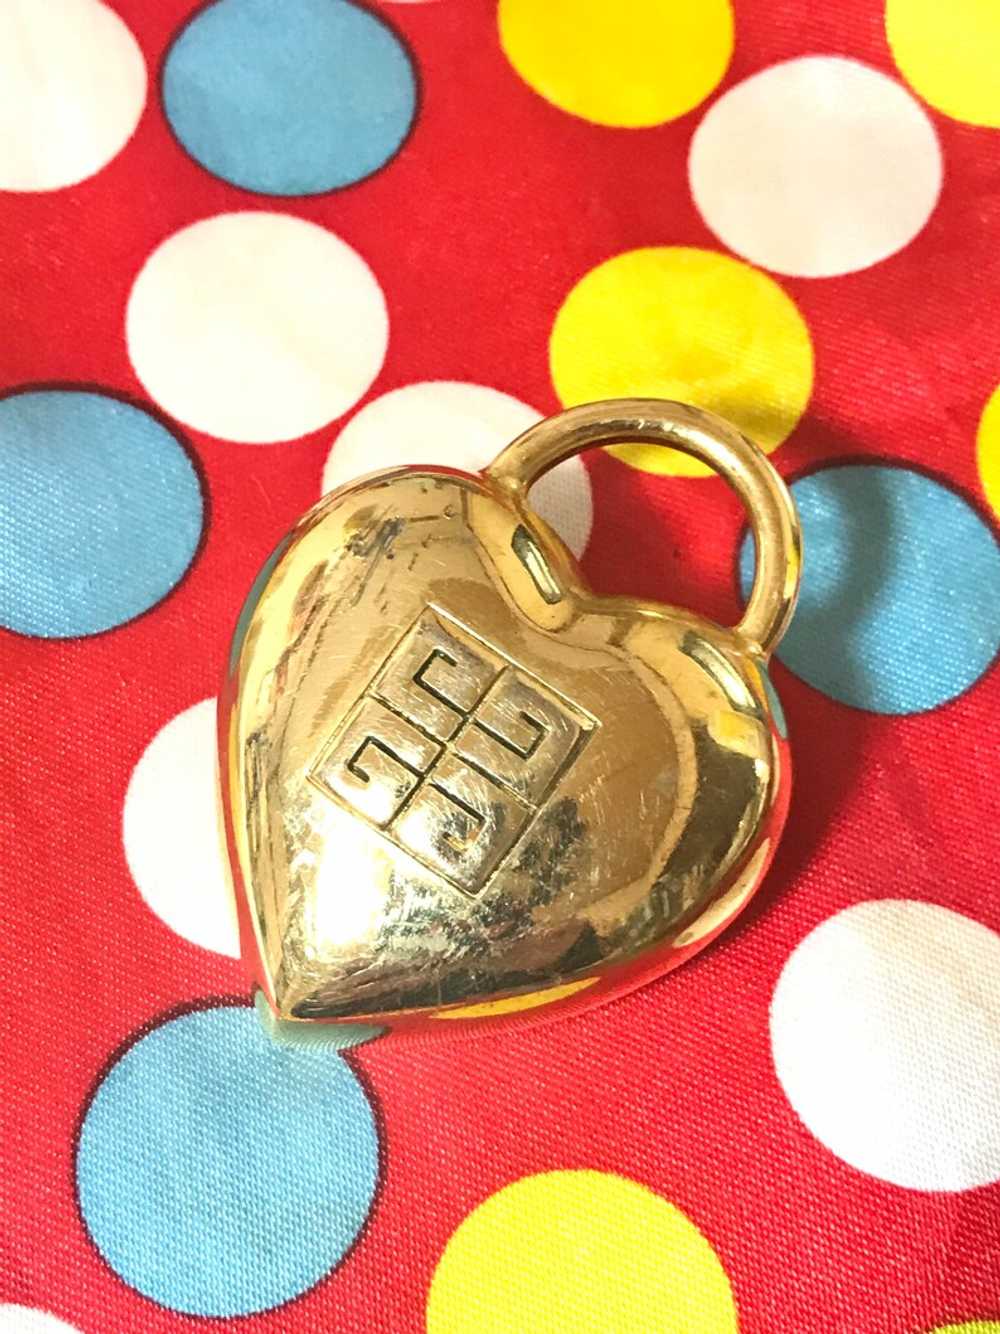 GIVENCHY Vintage heart brooch with logo mark - image 1